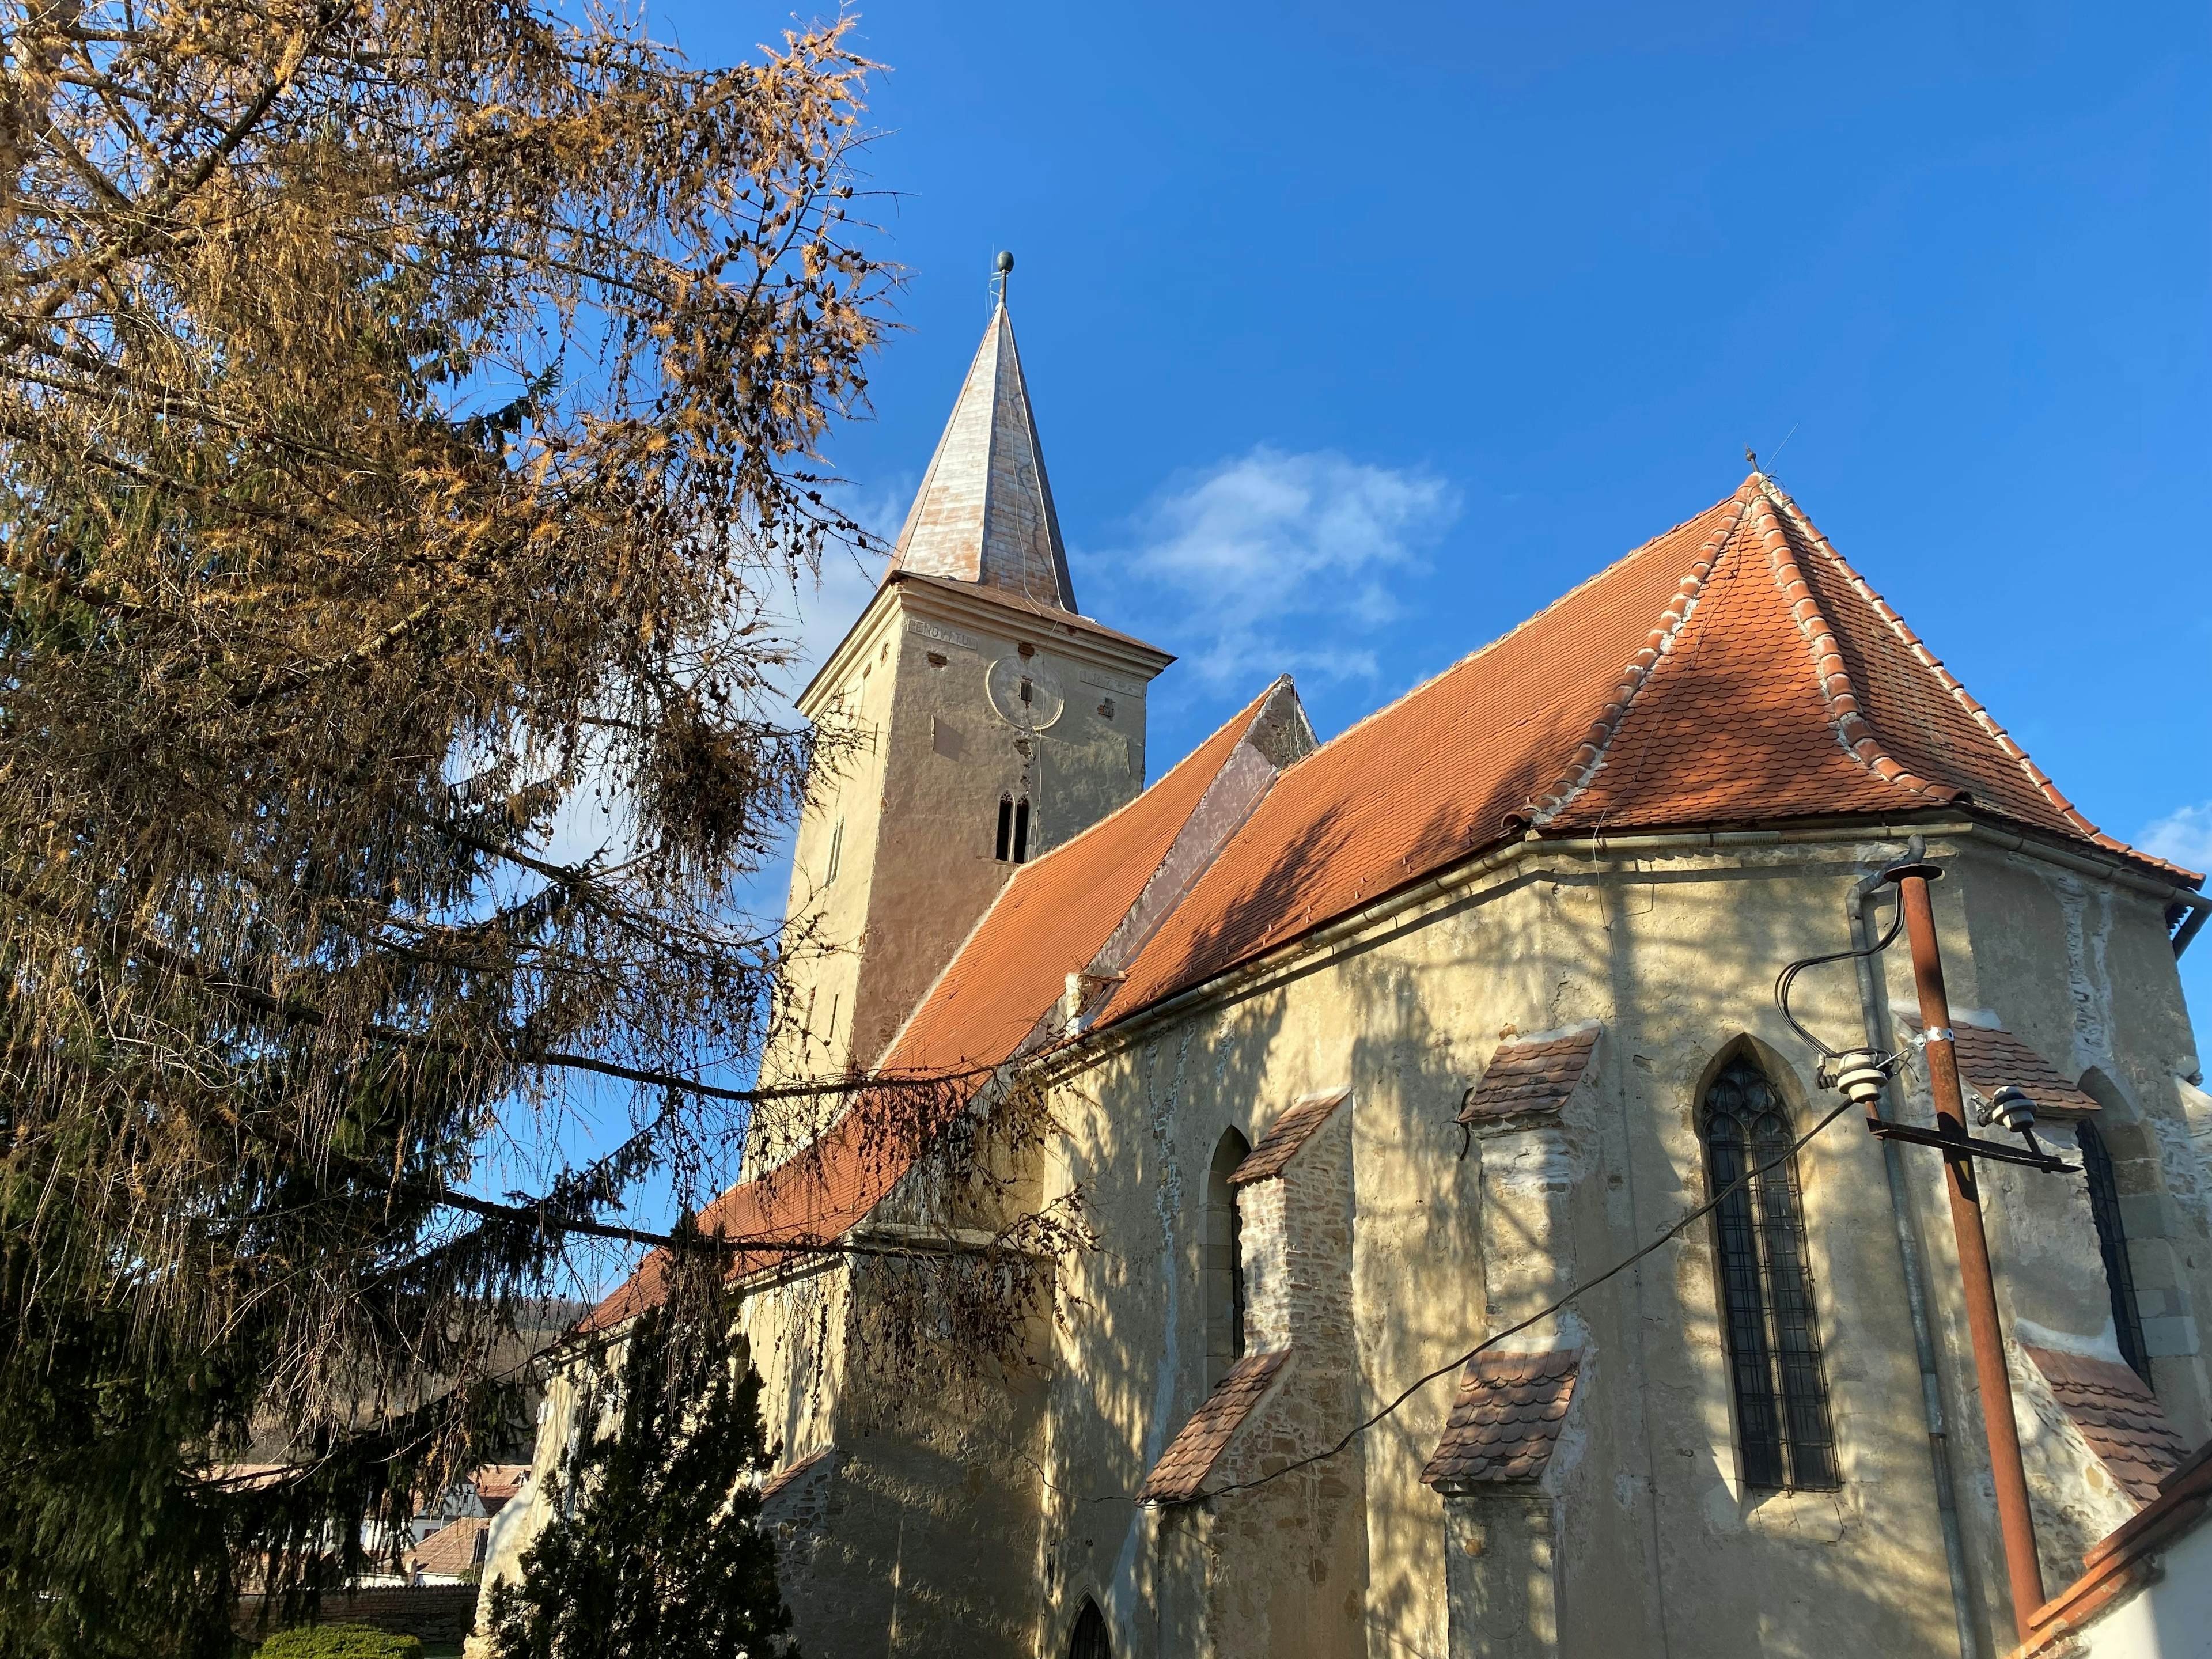 Discover the treasure of the fortified church in Curciu